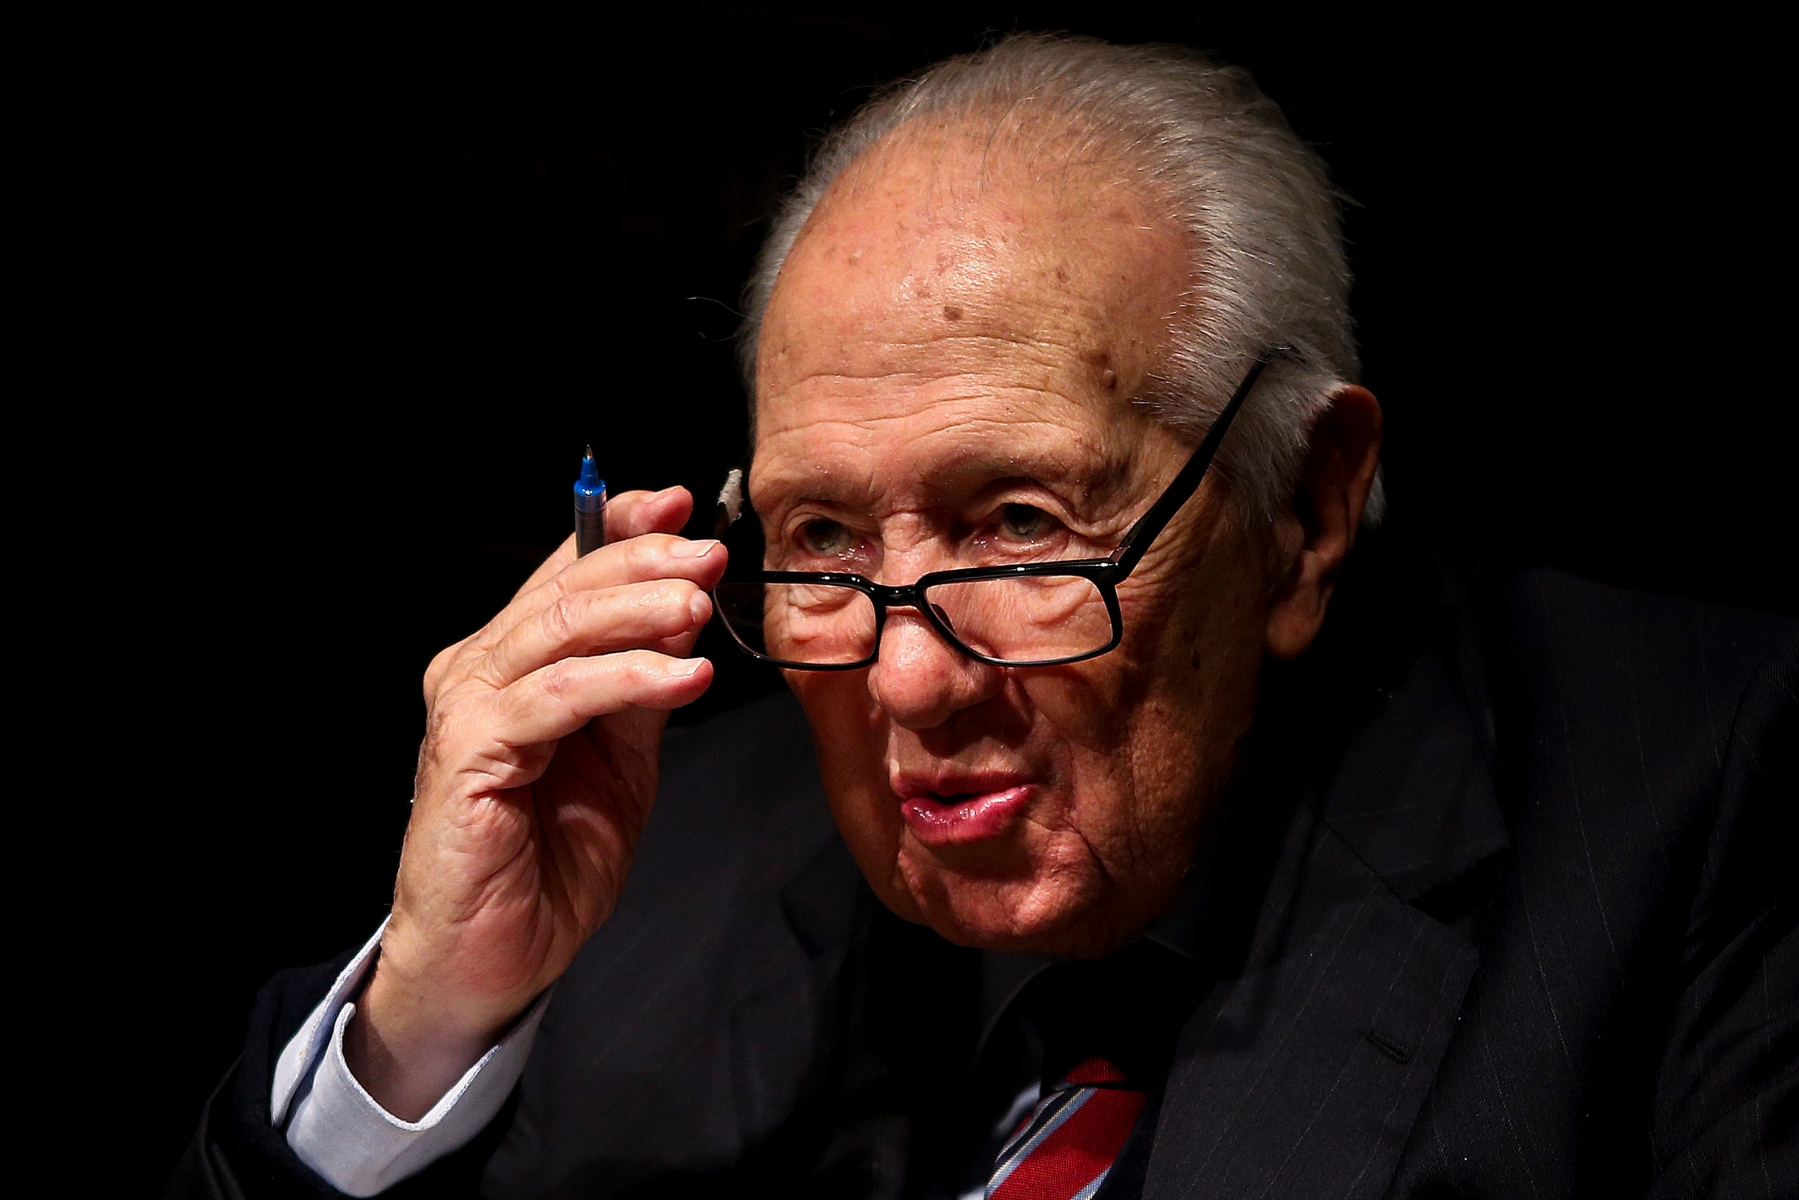 epa05703611 A file photo dated 15 January 2015 and made available 07 January 2017 of former Portuguese Socialist leader and former President, Mario Soares, during a book presentation in Lisbon, Portugal. It was reported that Mario Soares died in Lisbon at 92 years of age on 07 January 2017.  EPA/JOSE SENA GOULAO PORTUGAL MARIO SOARES